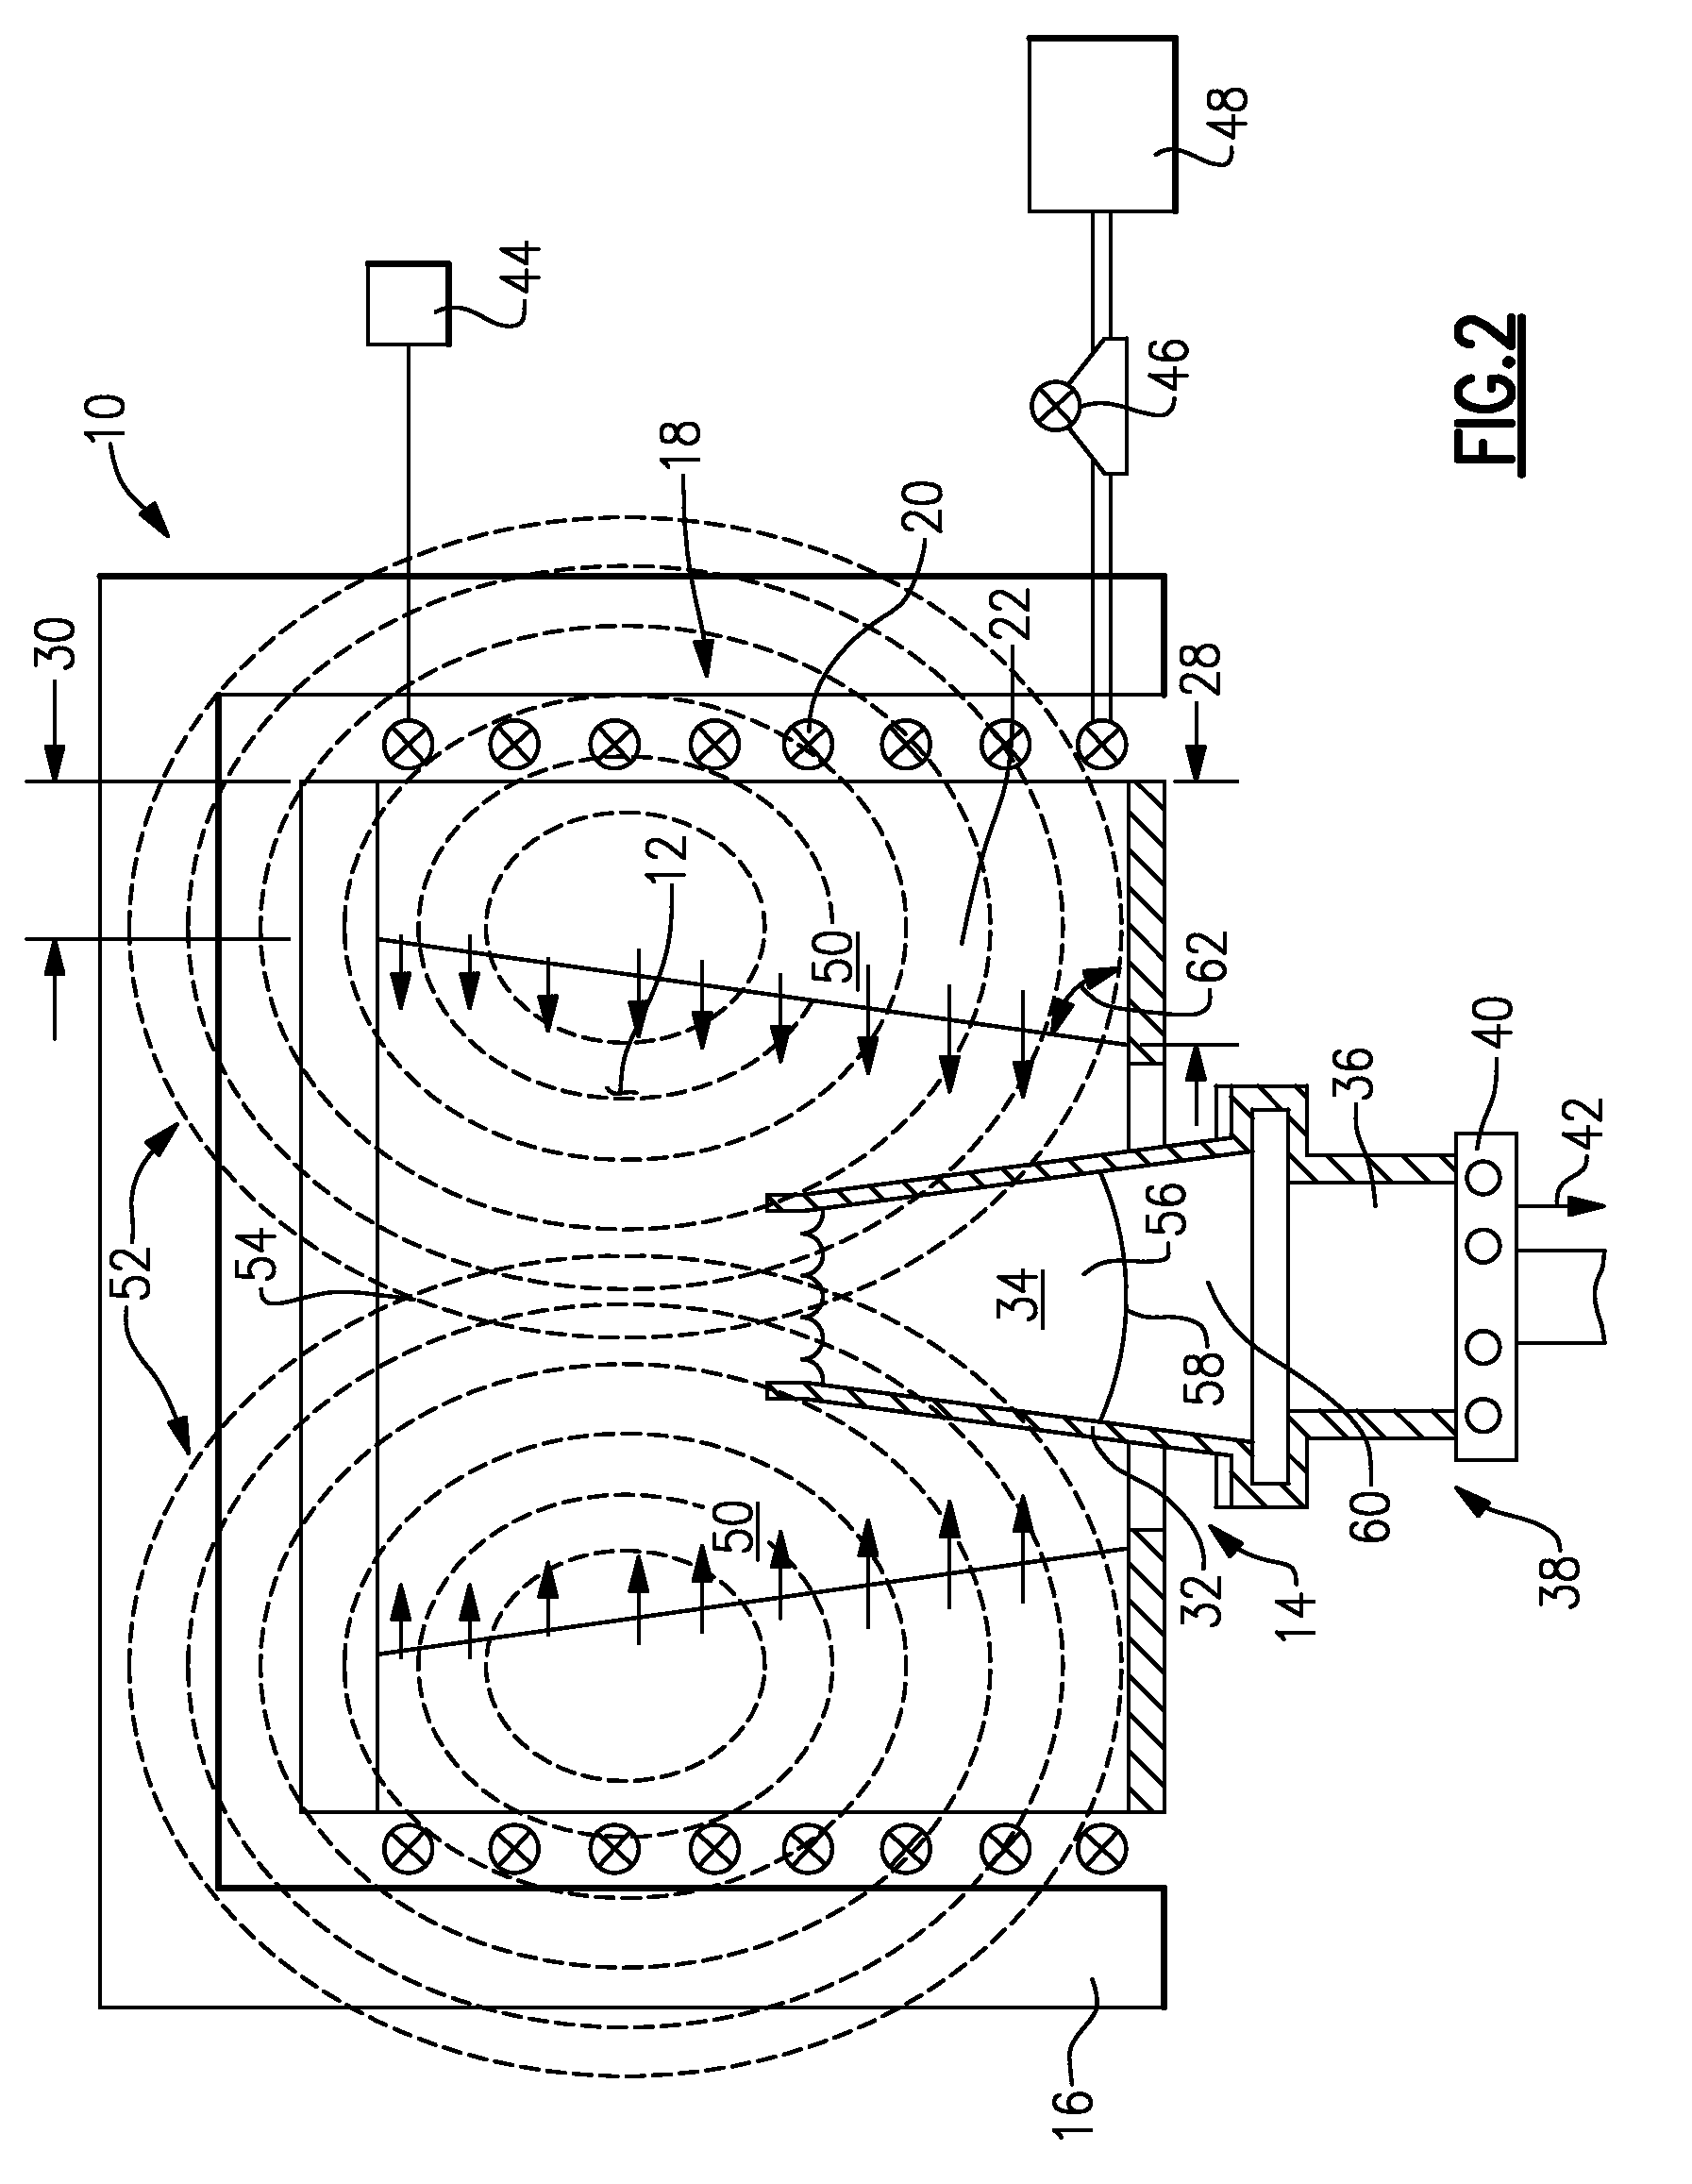 Method of producing a fine grain casting